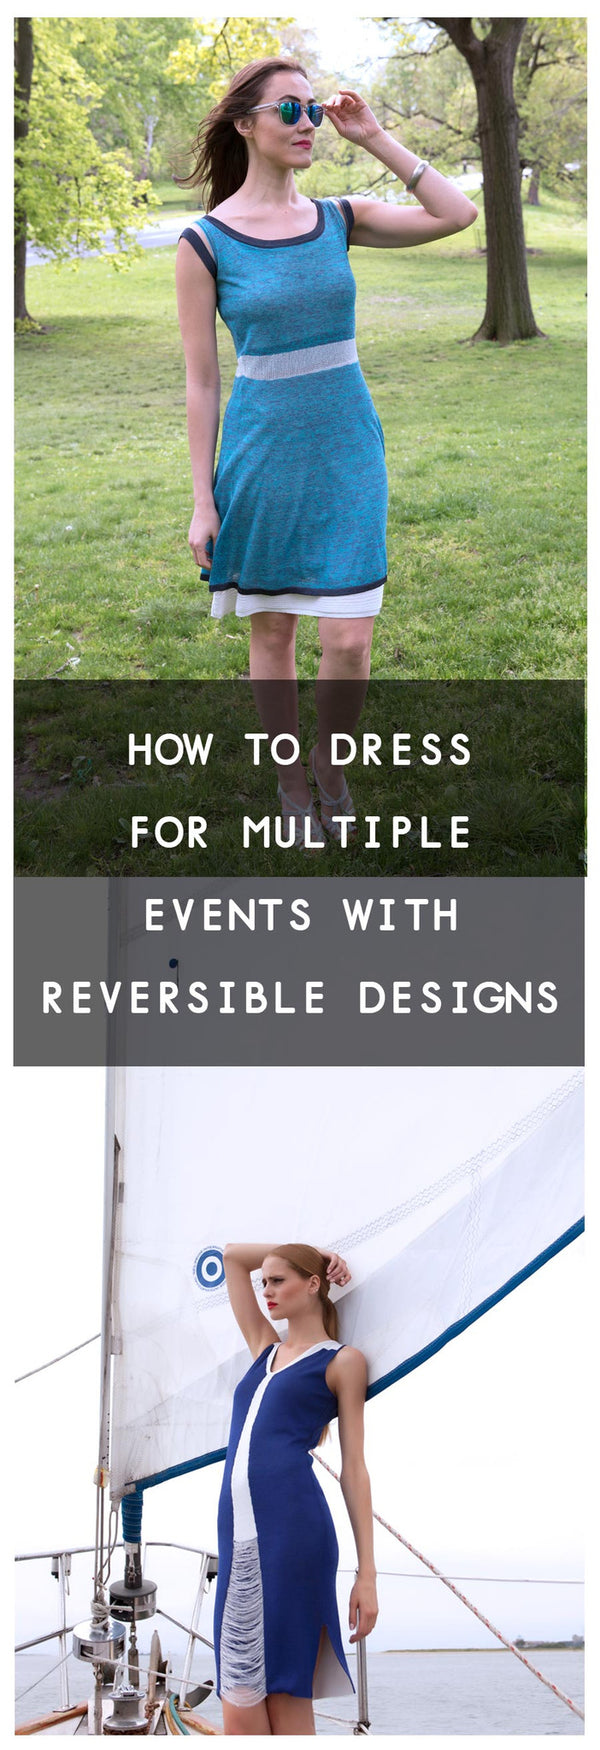 How to Dress for Multiple Events with Reversible Designs